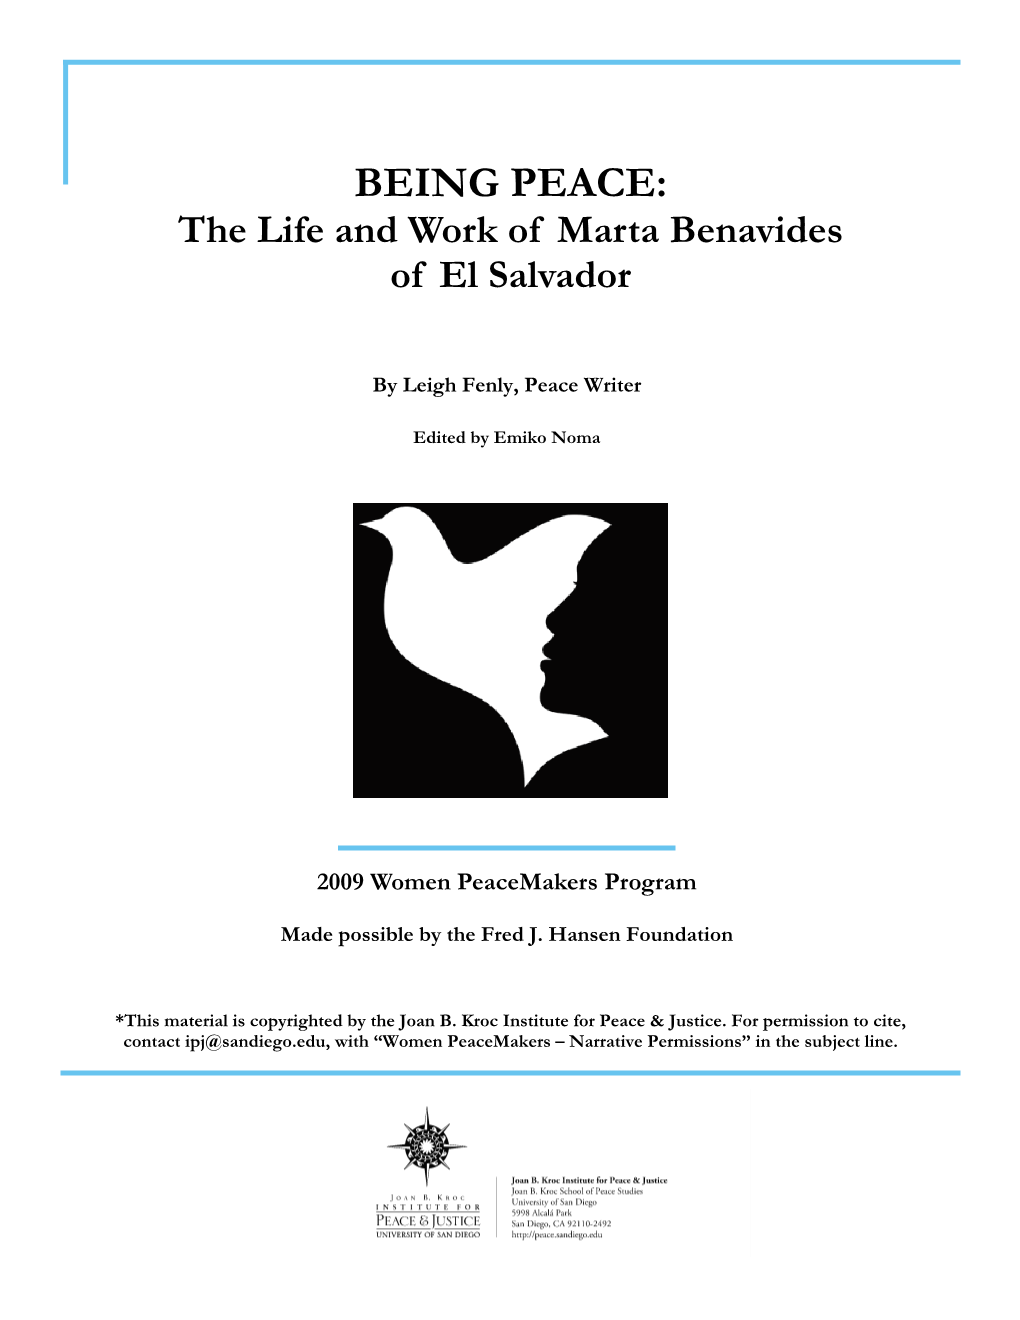 BEING PEACE:The Life and Work of Marta